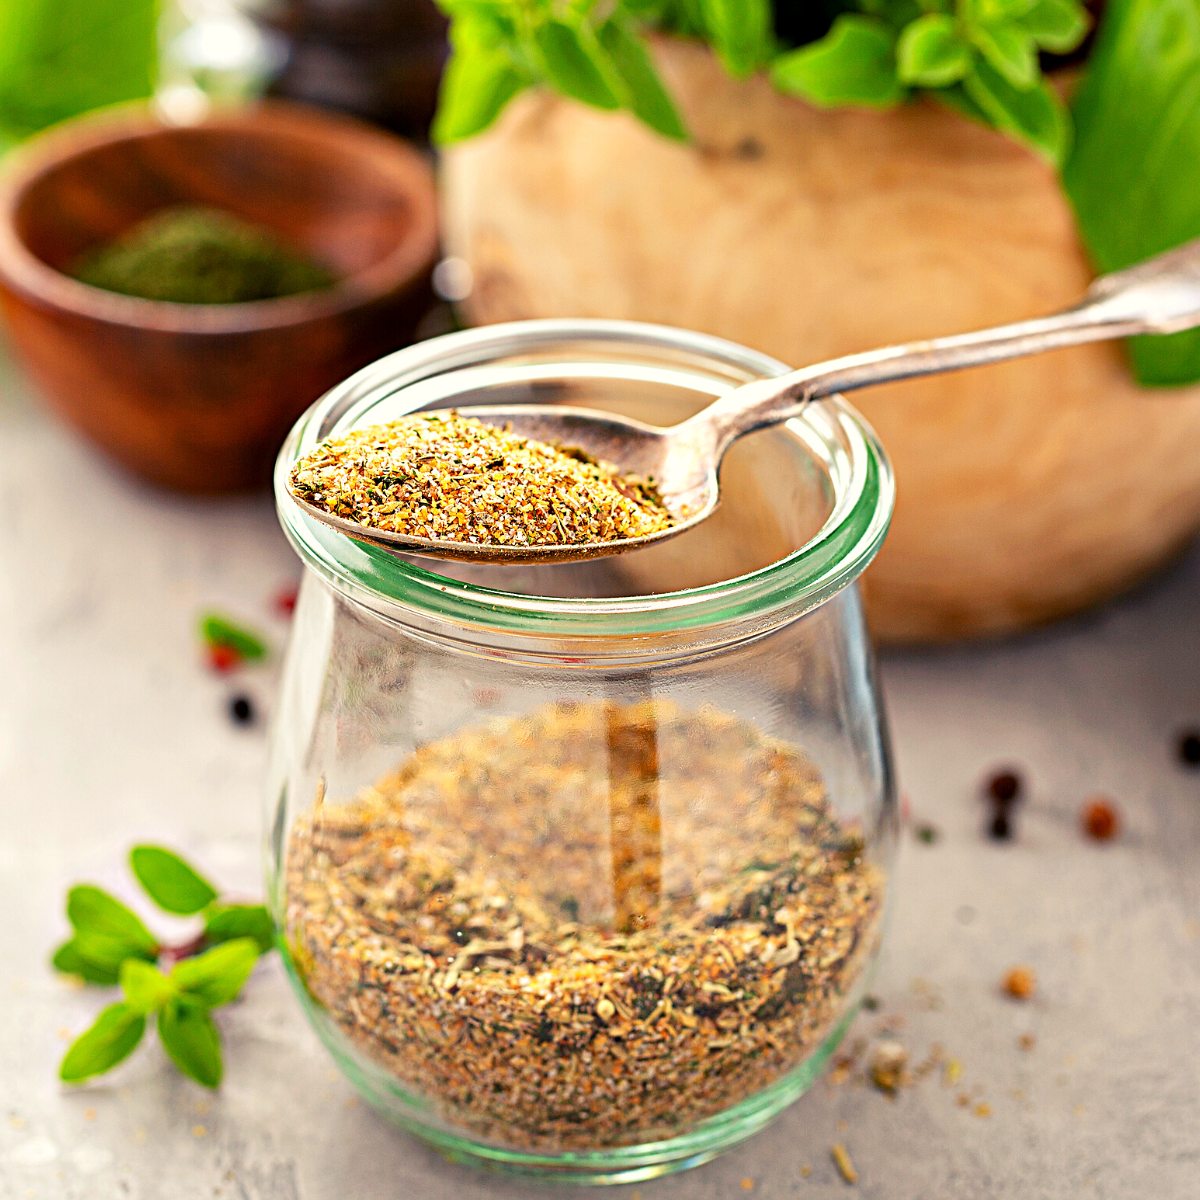 Homemade Poultry Seasoning with Variations